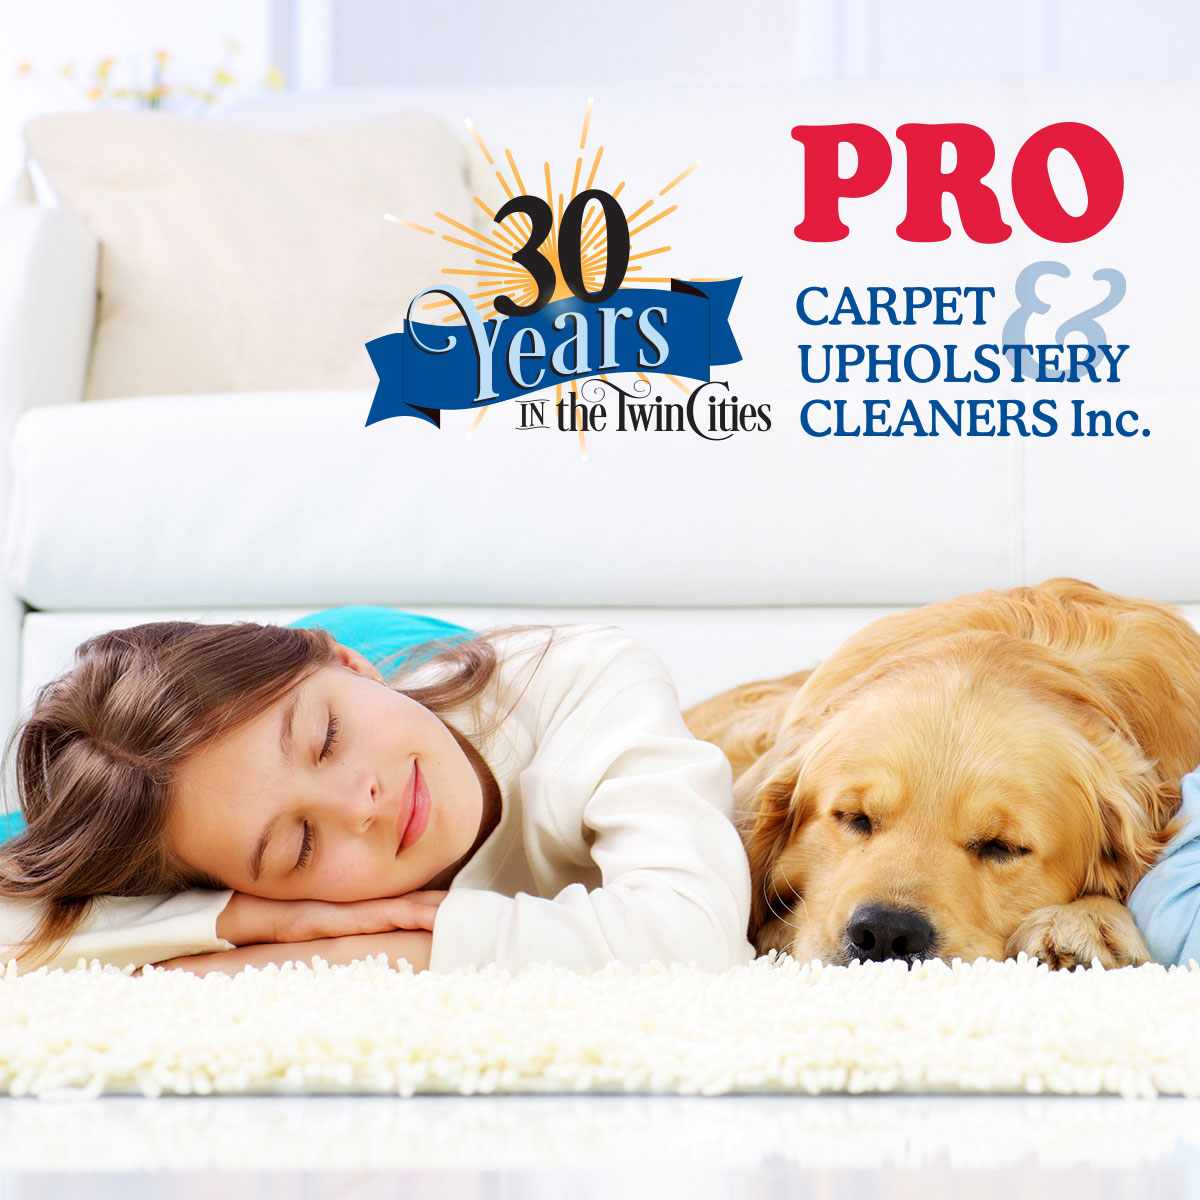 Child and dog sleeping on carpeting, rest easy